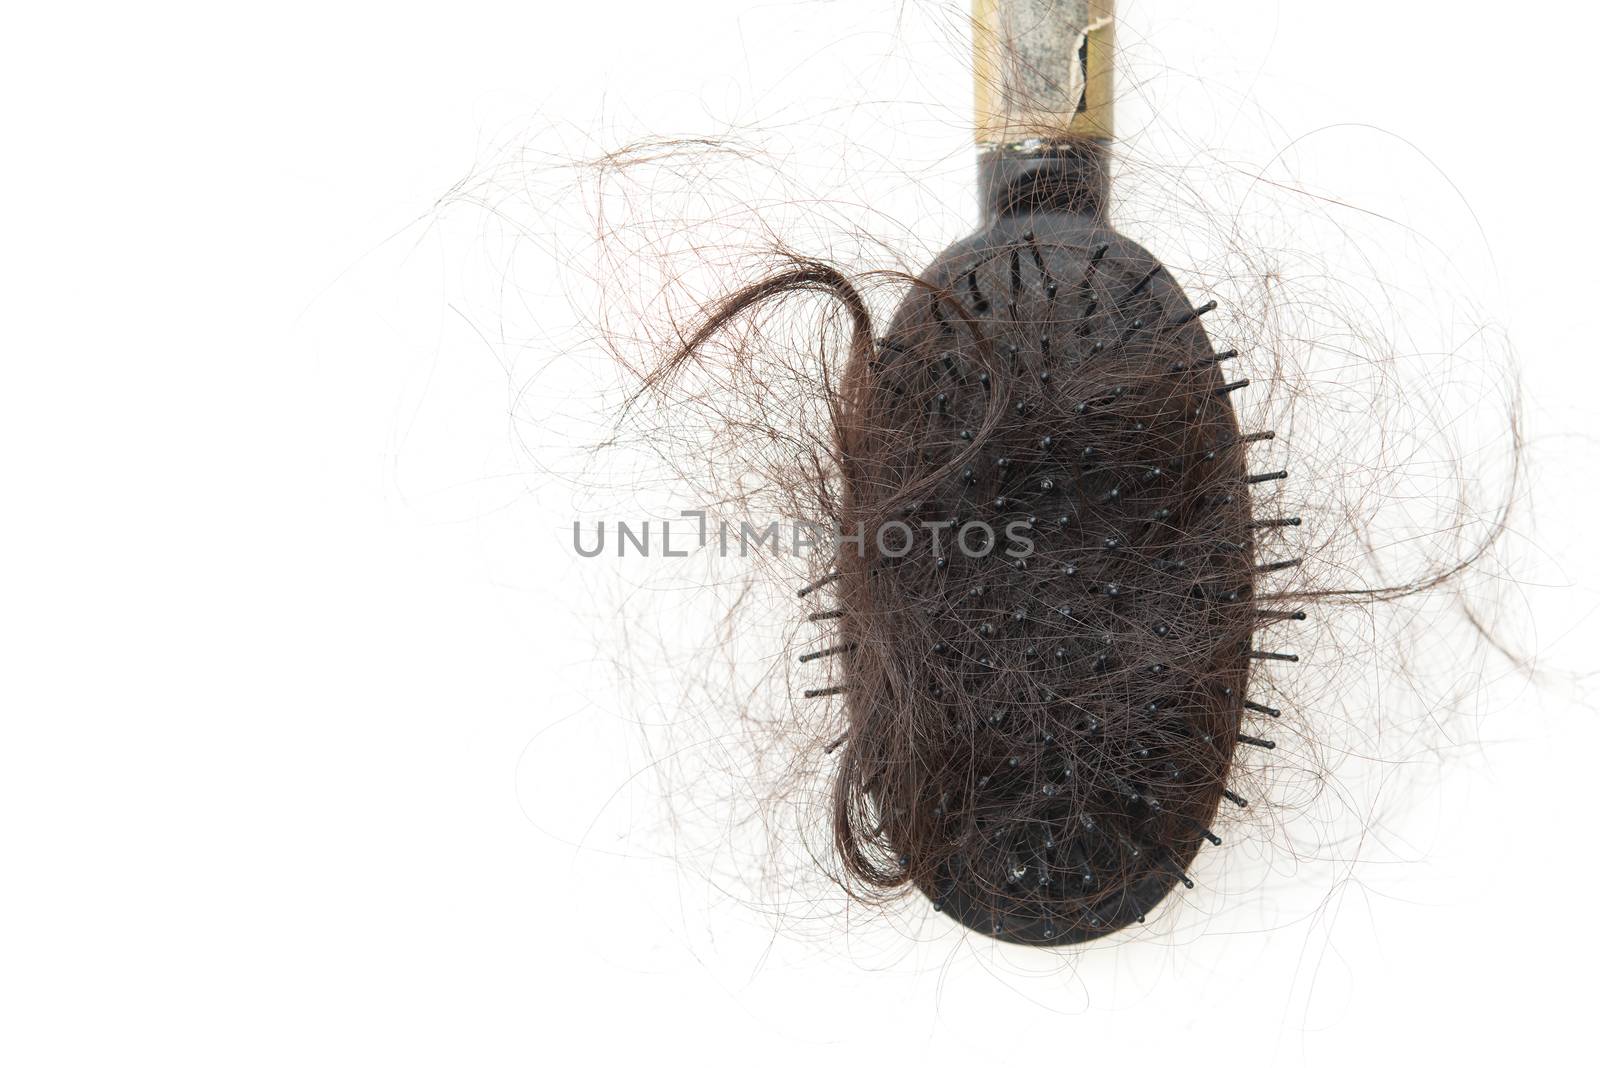 Used dirty hairbrush with lost hair on it, isolated on white background.